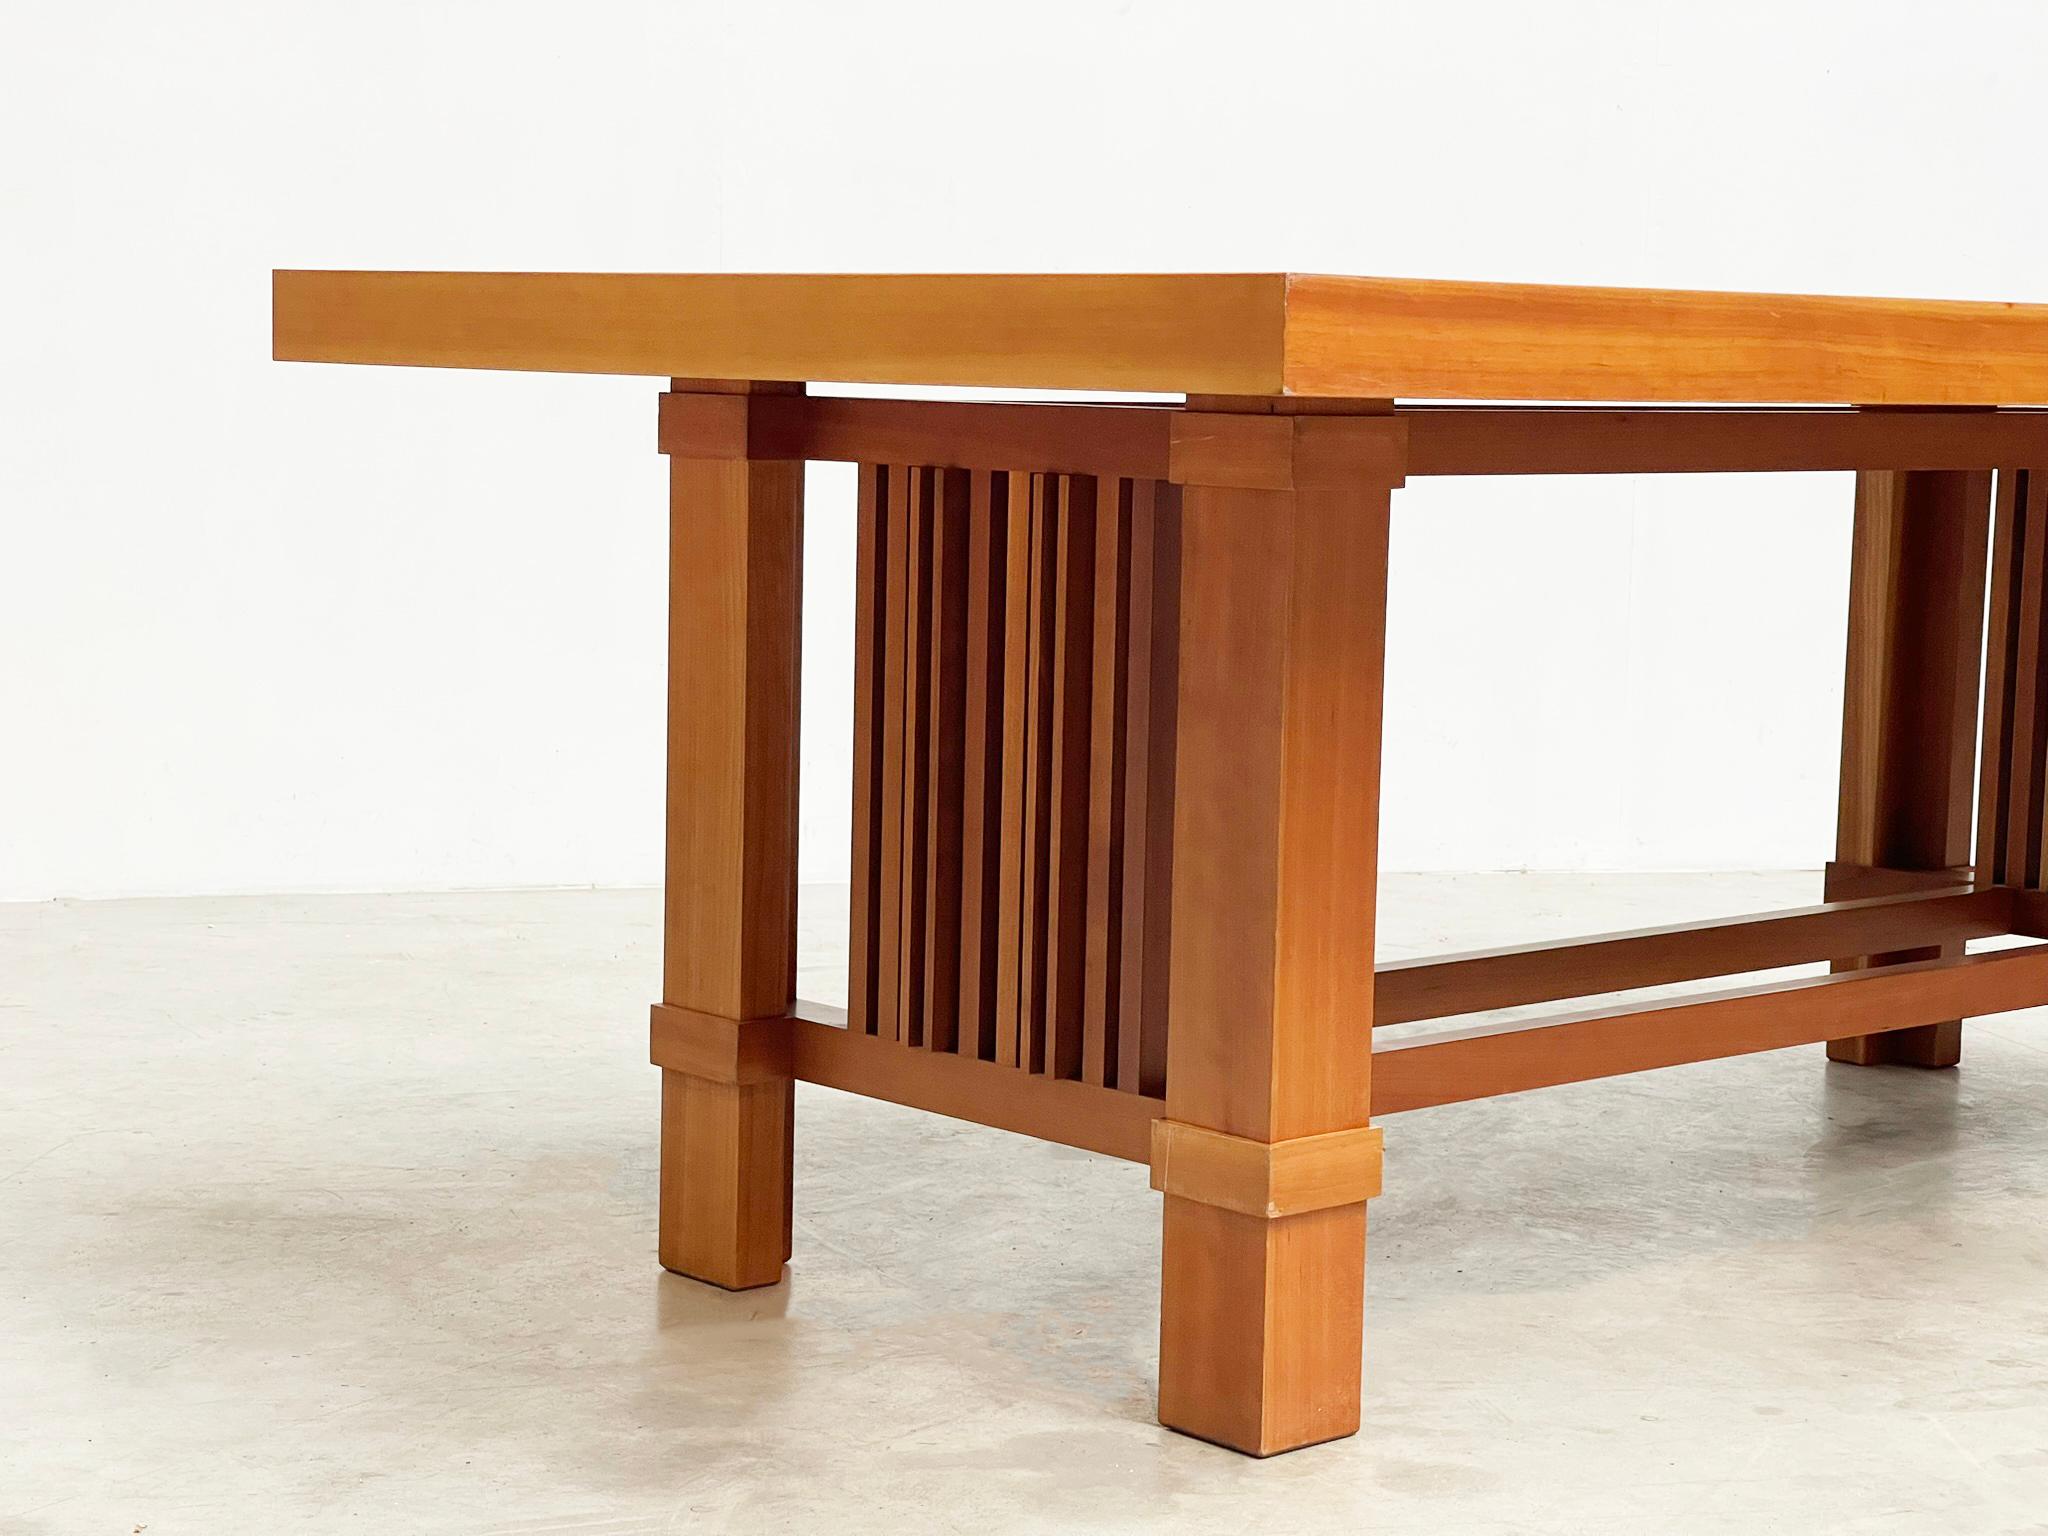 Frank Lloyd Wright “608 Taliesin” Dining Table signed by Cassina, 1986 For Sale 1